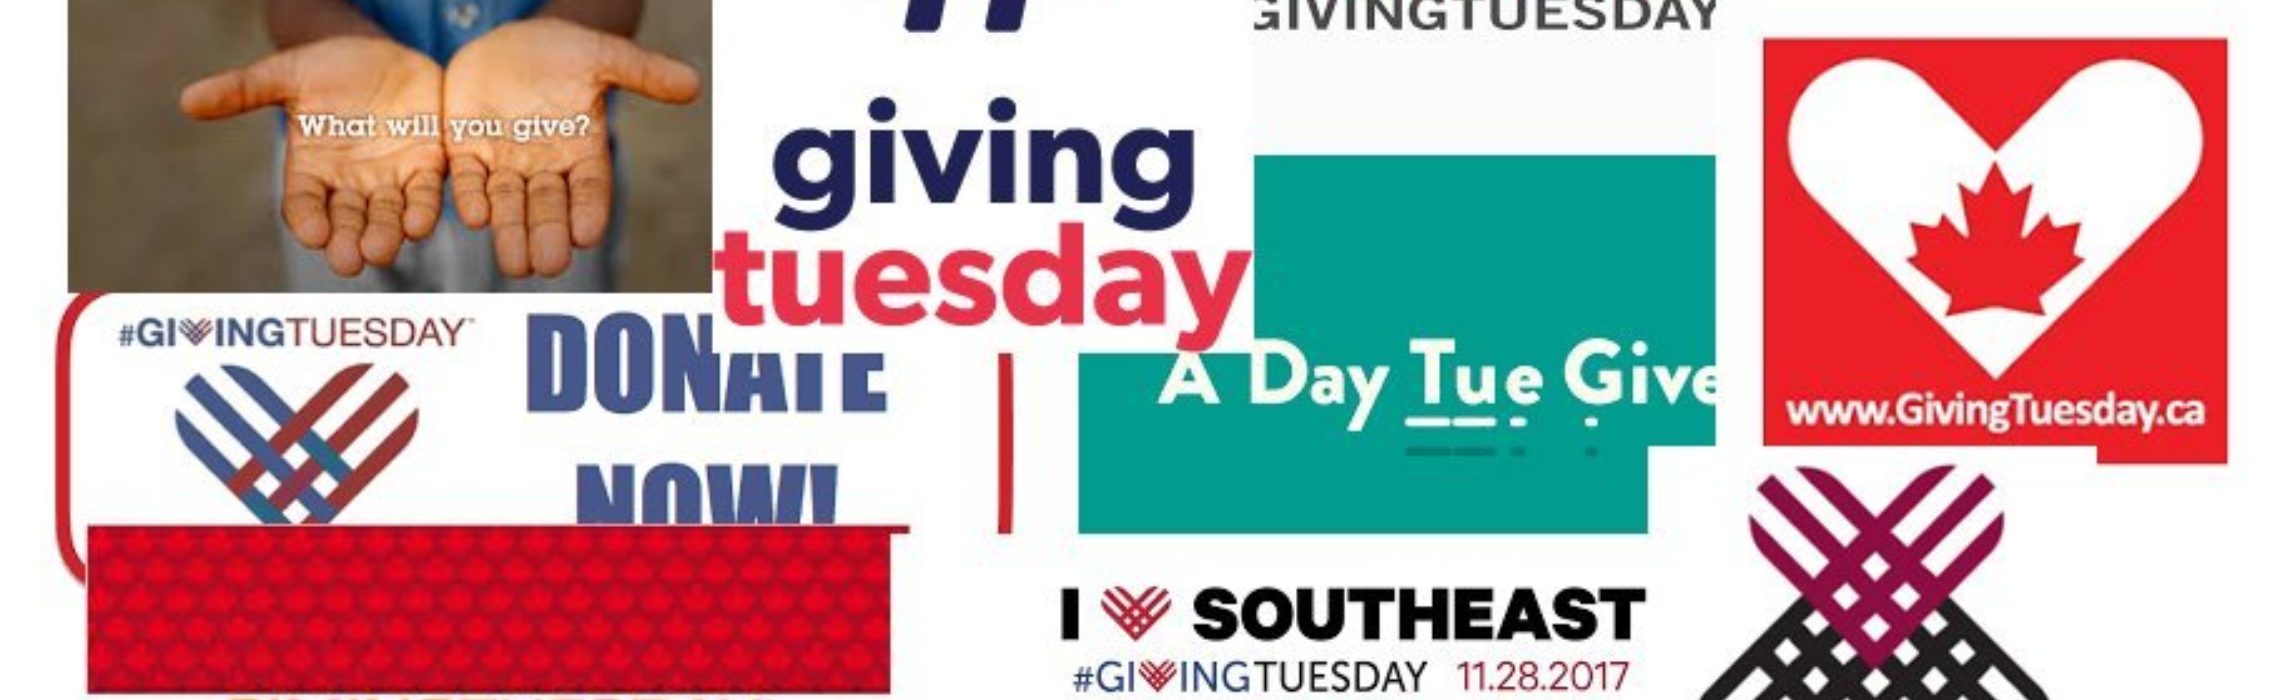 Are You Giving In to #GivingTuesday?